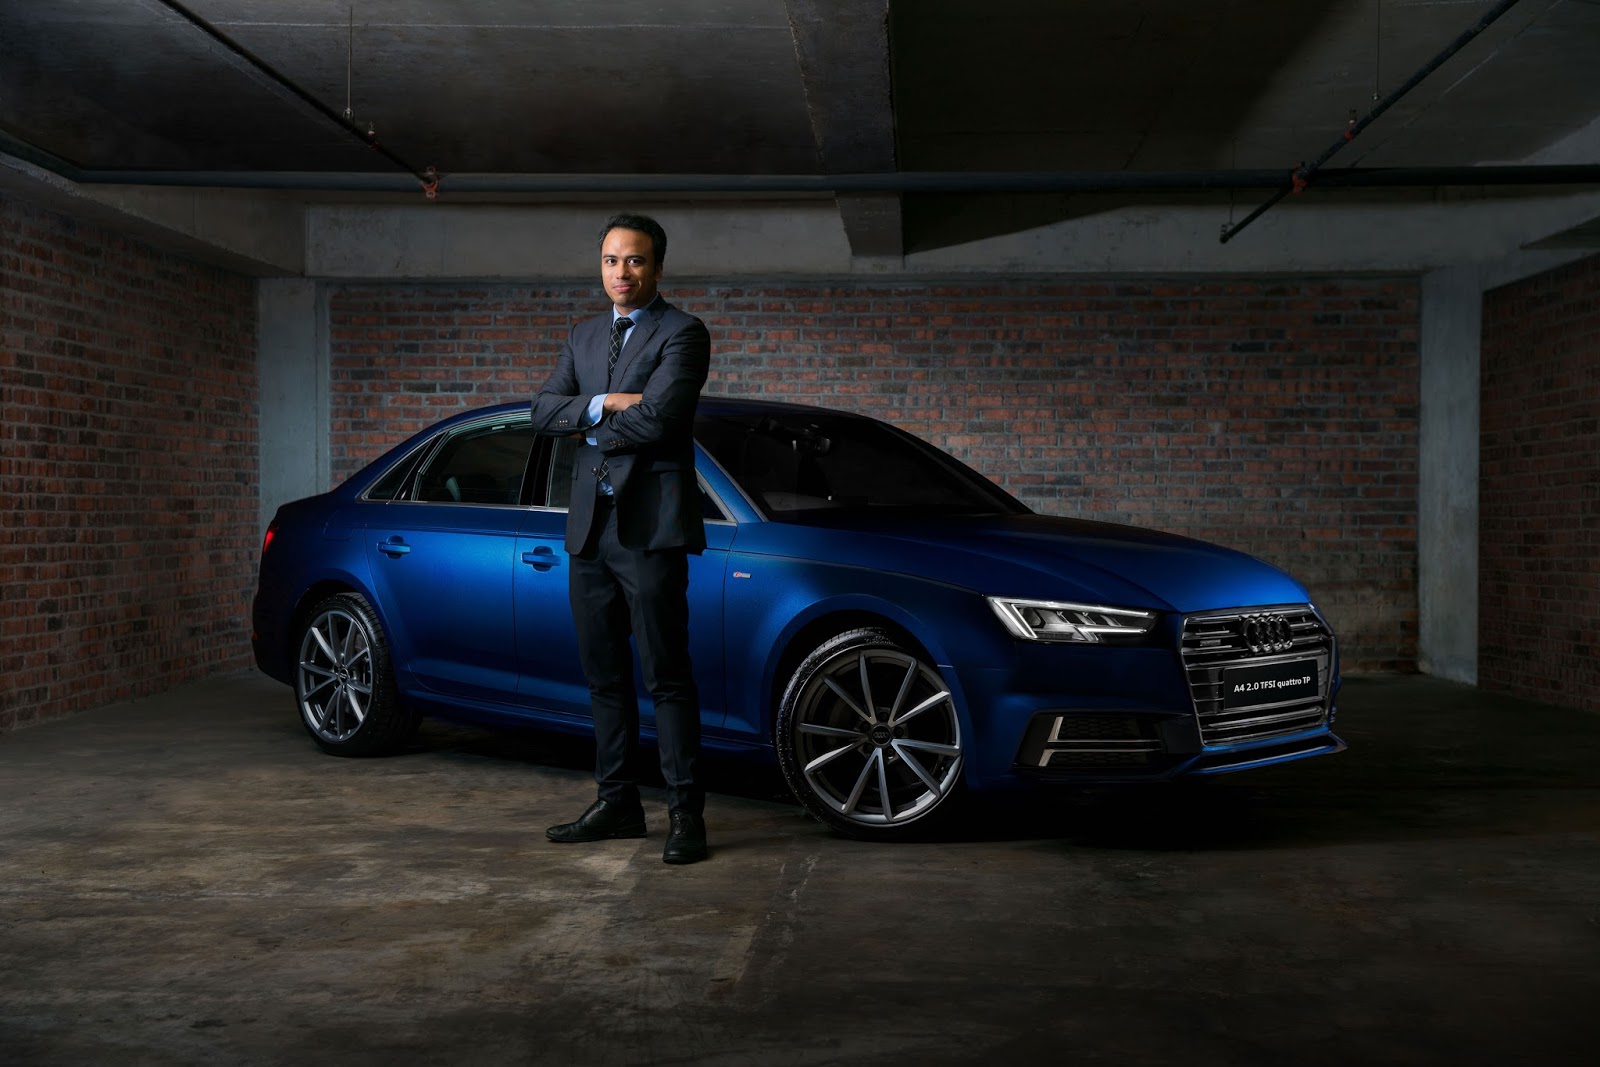 Motoring Malaysia Three New Audi A4 Tech Pack Variants Launched The A4 1 4 Tfsi Tech Pack The A4 2 0 Tfsi Quattro Tech Pack The Audi A4 2 0 Tfsi S Line Tech Pack